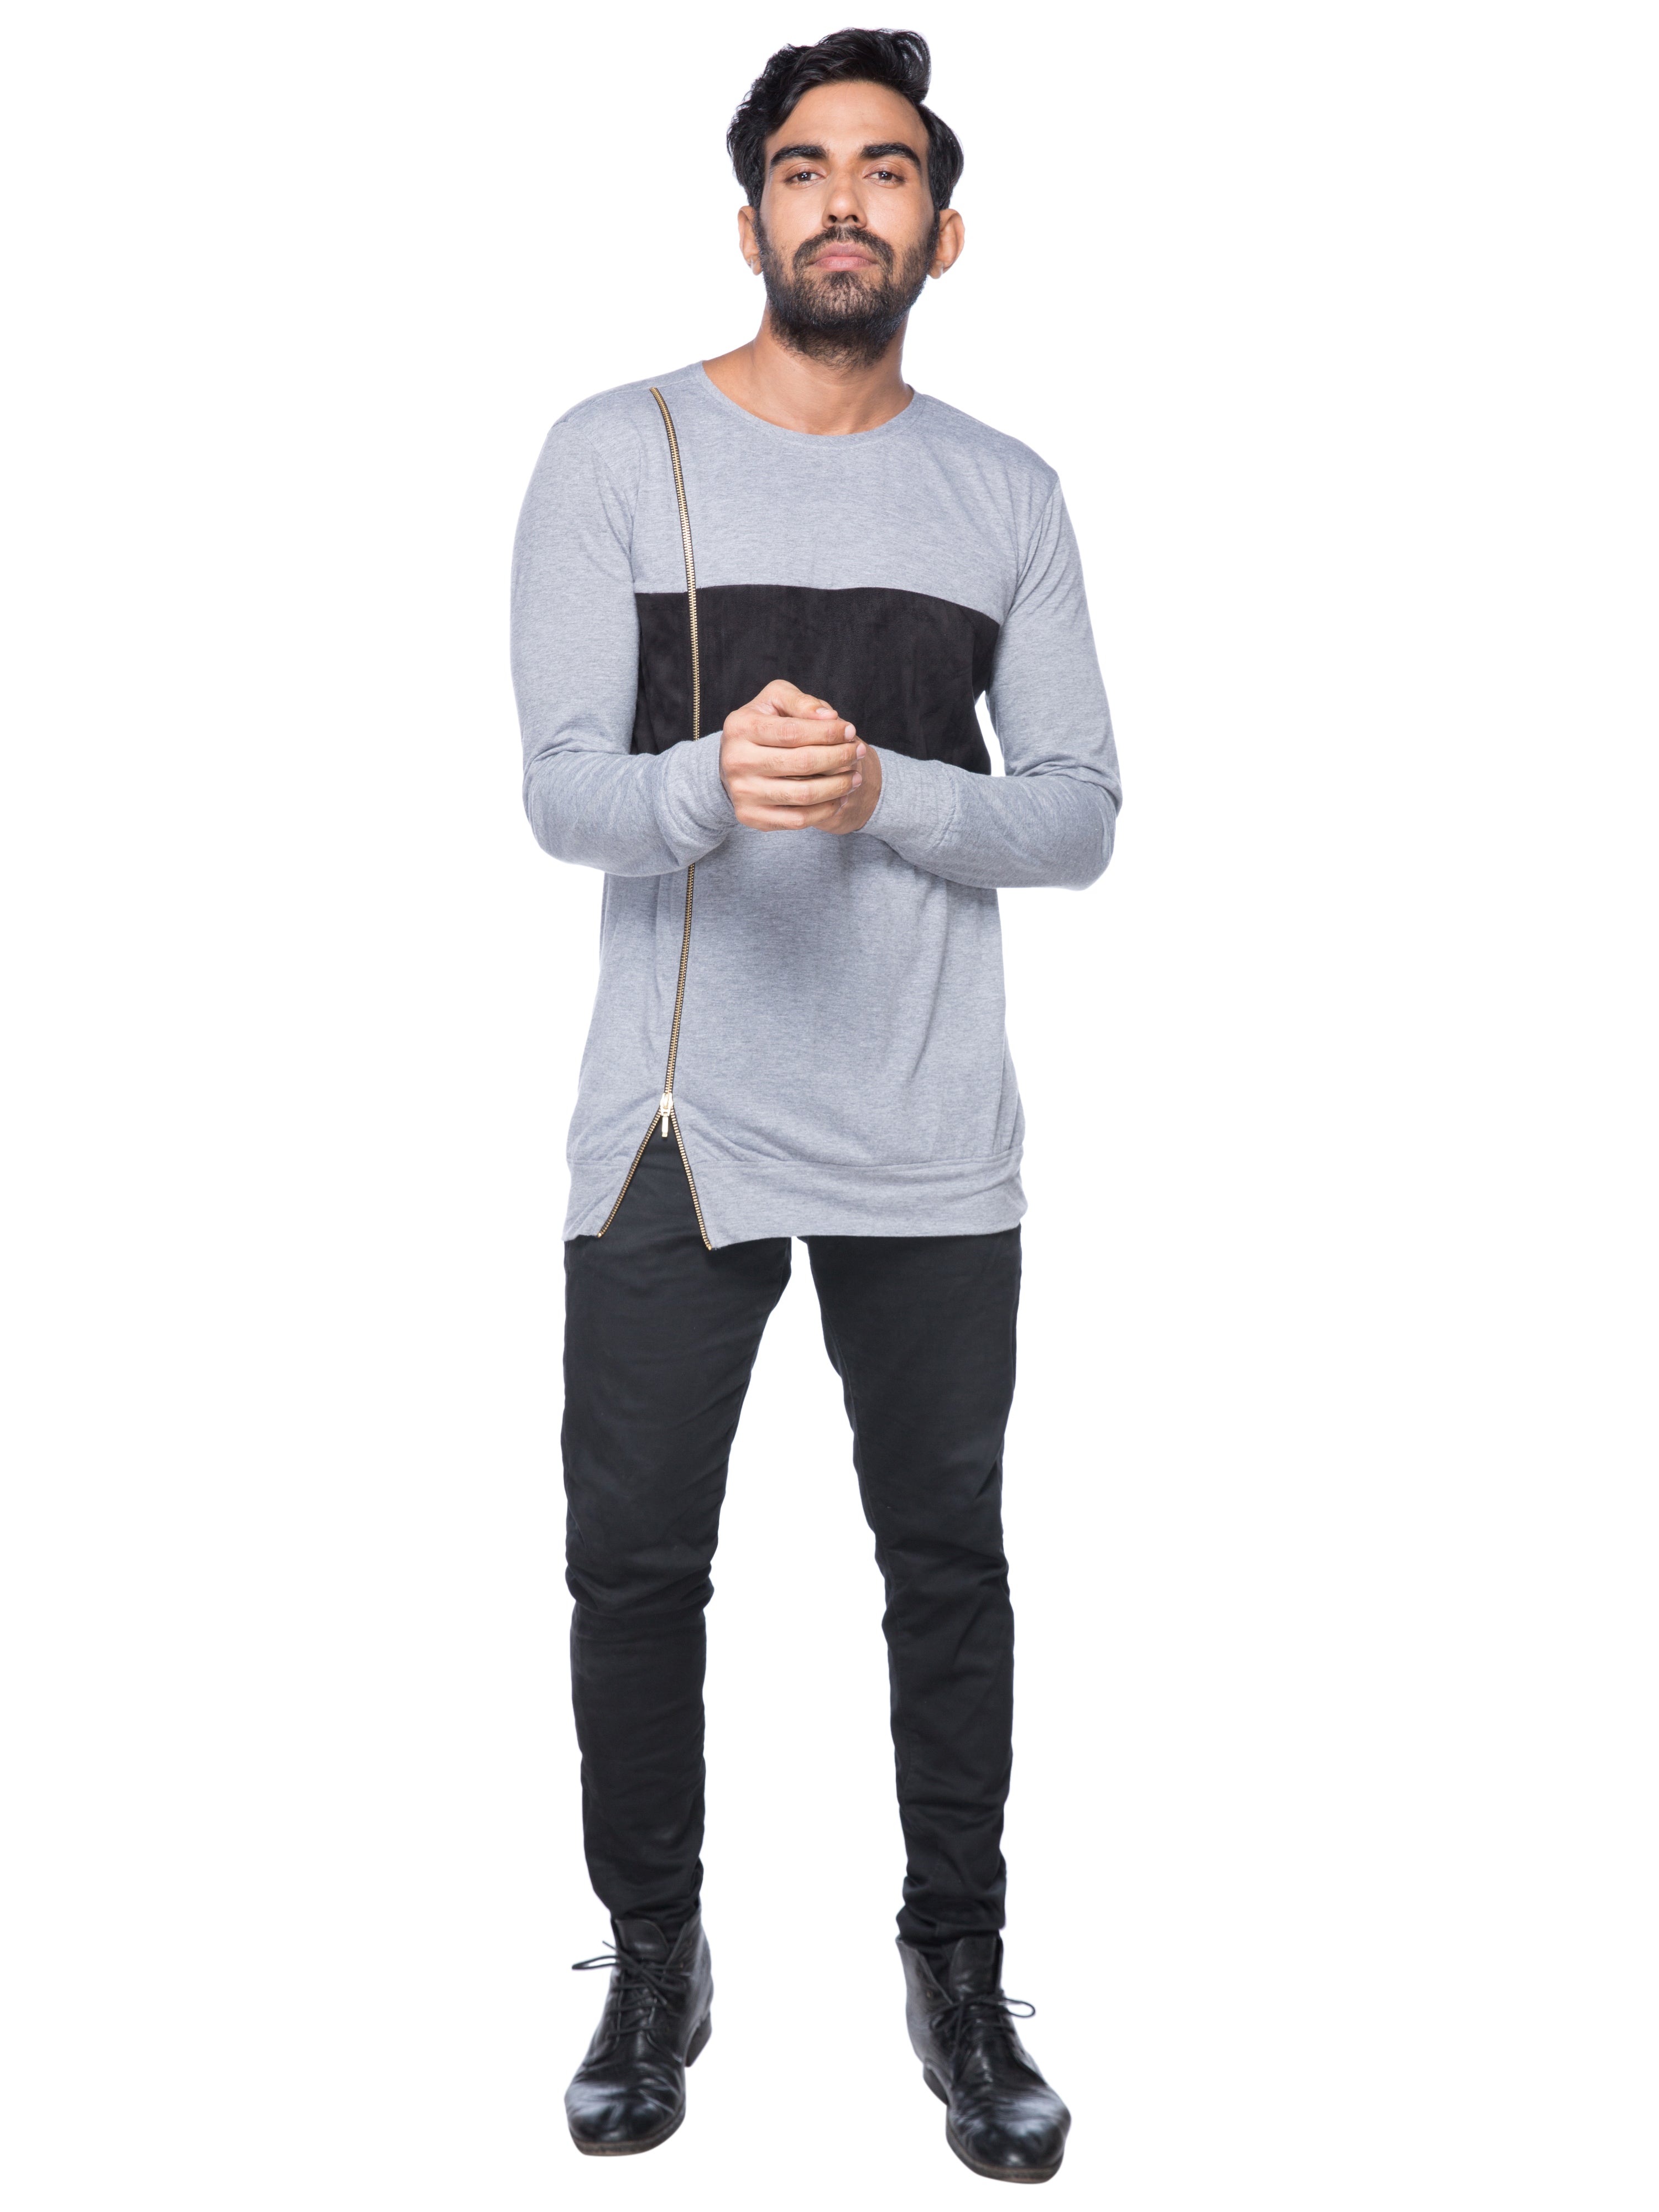 GREY AND BLACK SIDE ZIP T-SHIRT